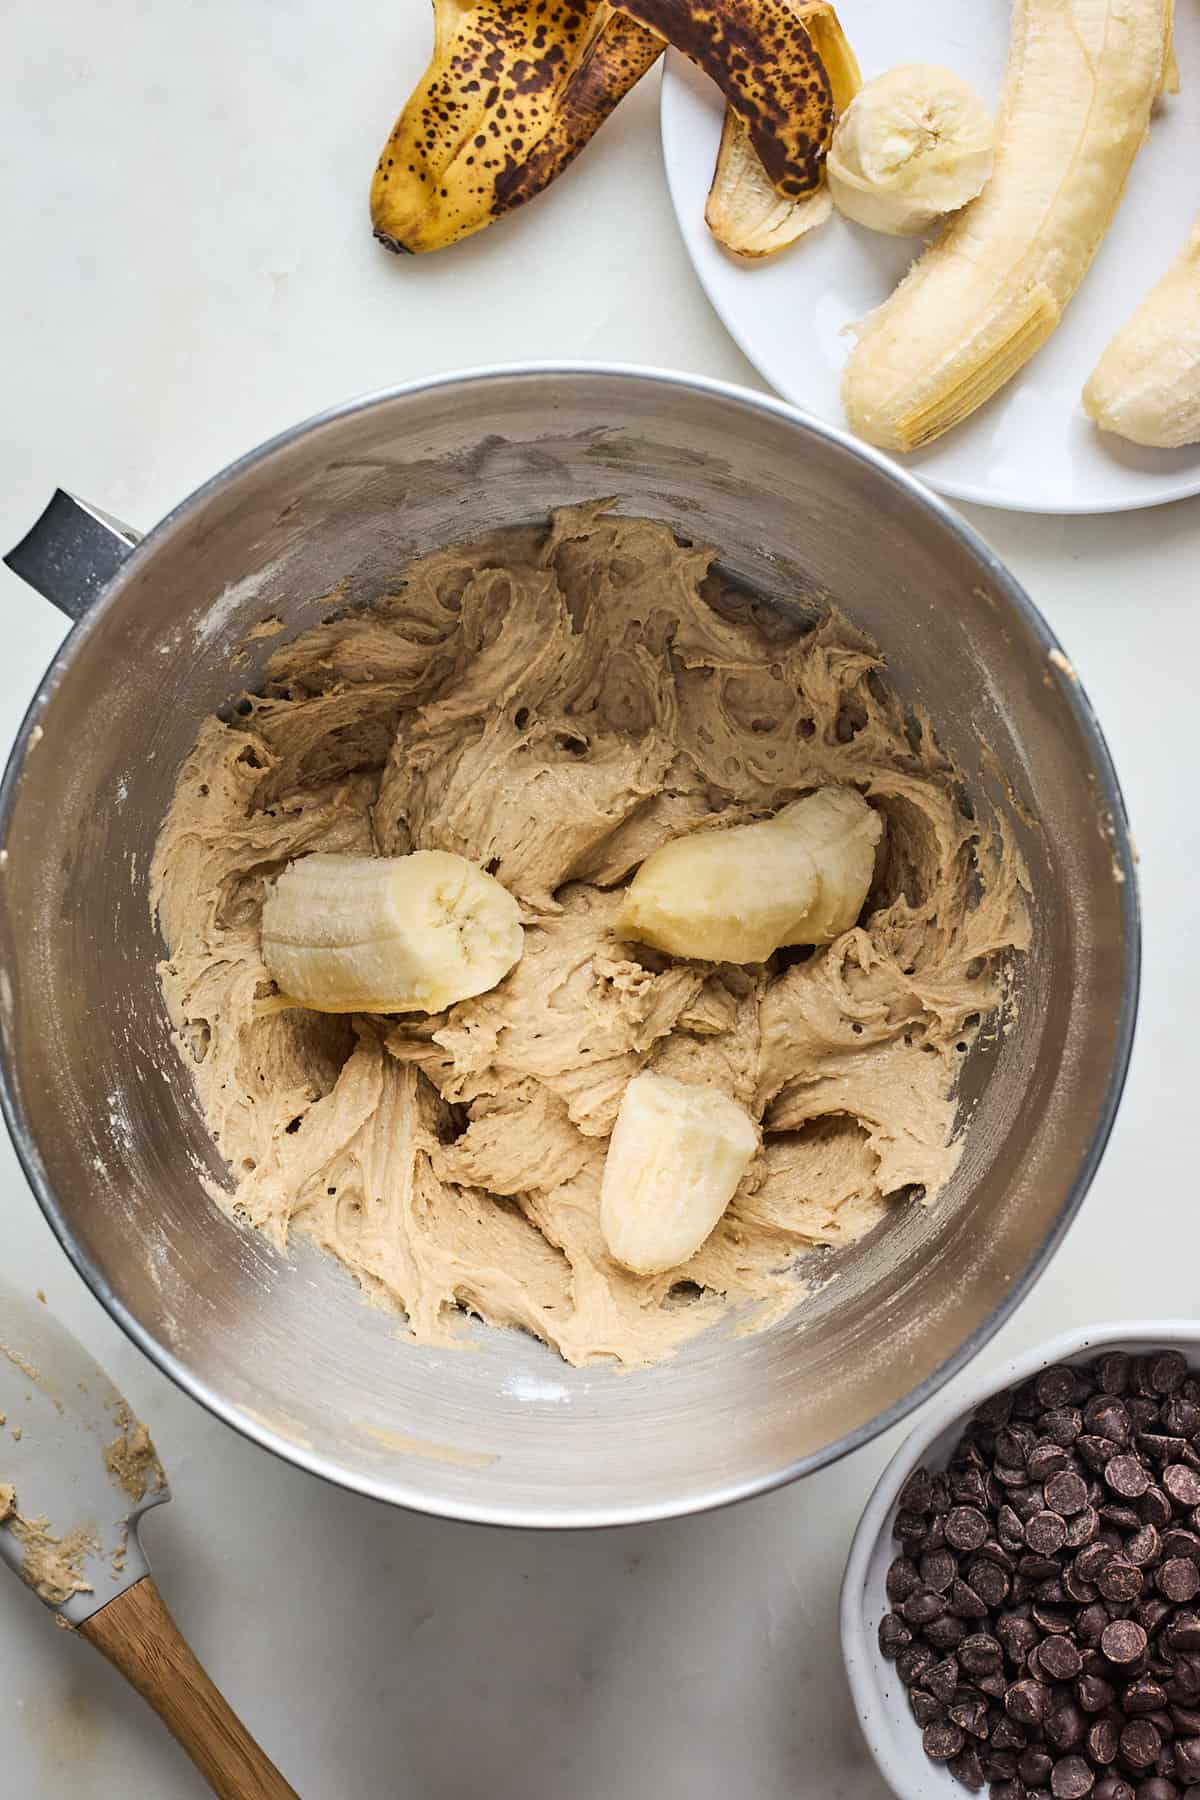 Ripe banana pieces in a bread batter in a mixing bowl